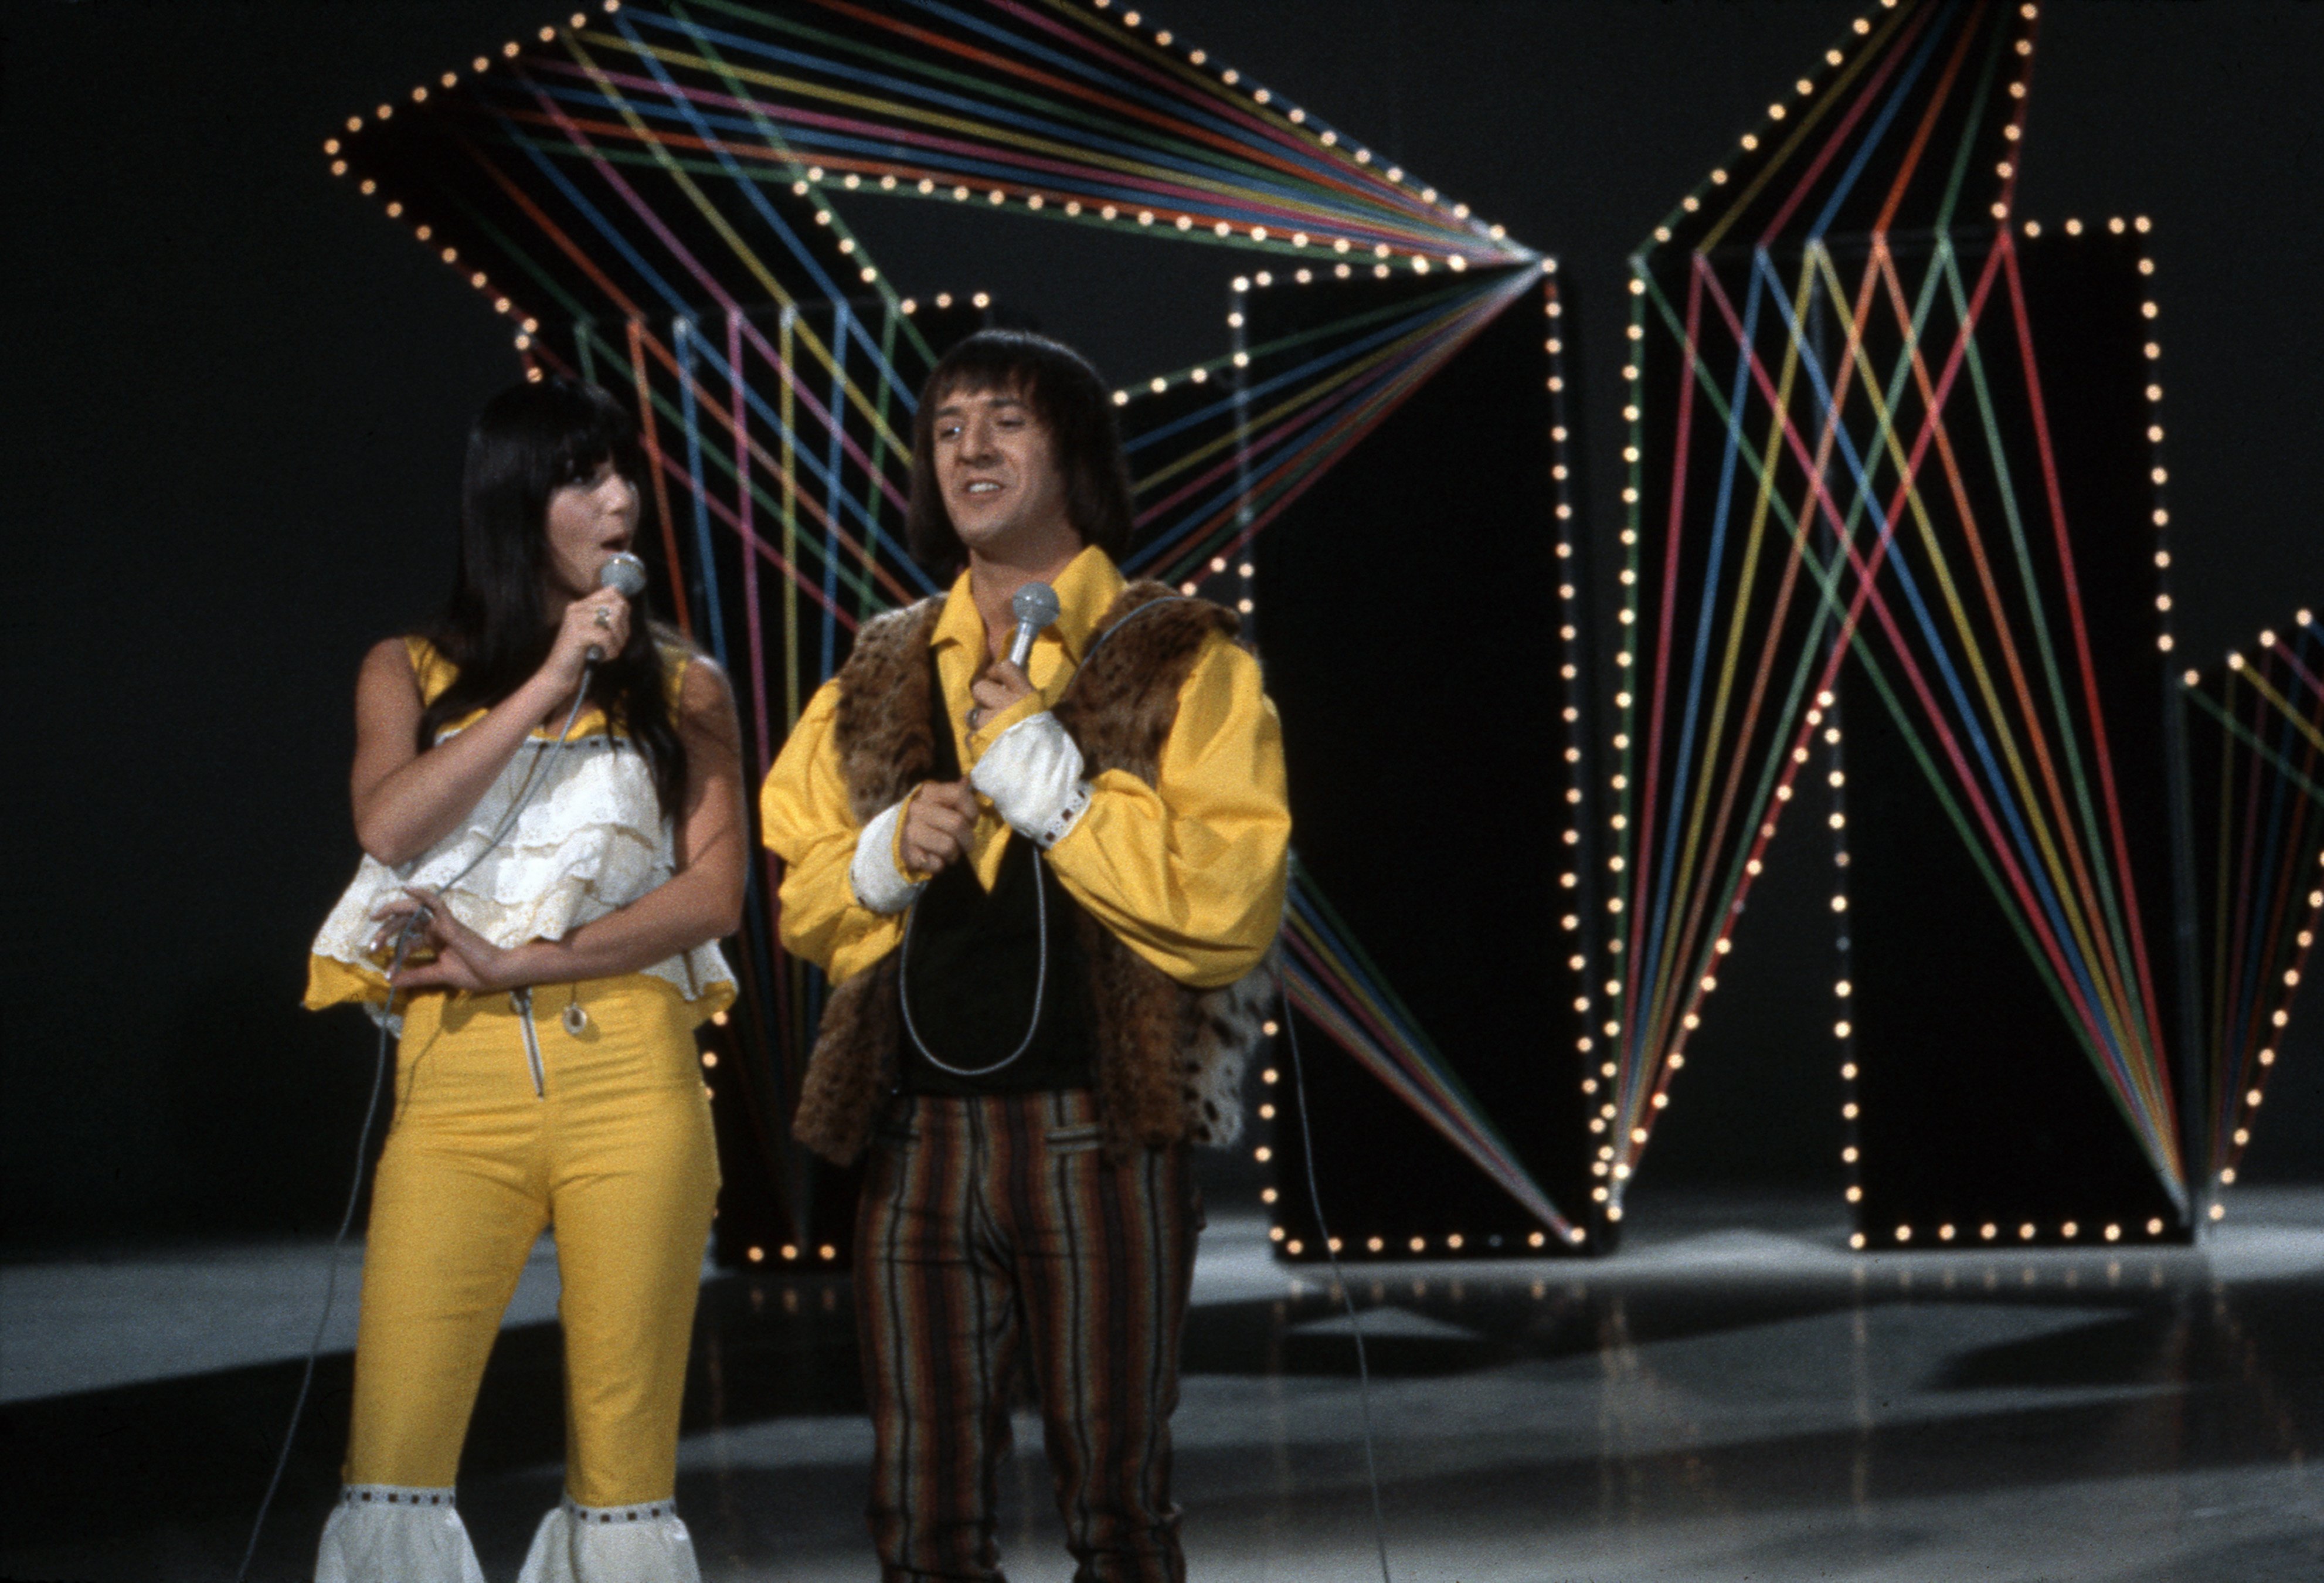 Pop duo Sonny and Cher performing on the NBC TV music show "Hullabaloo" on September 1, 1965 in New York City | Source: Getty Images